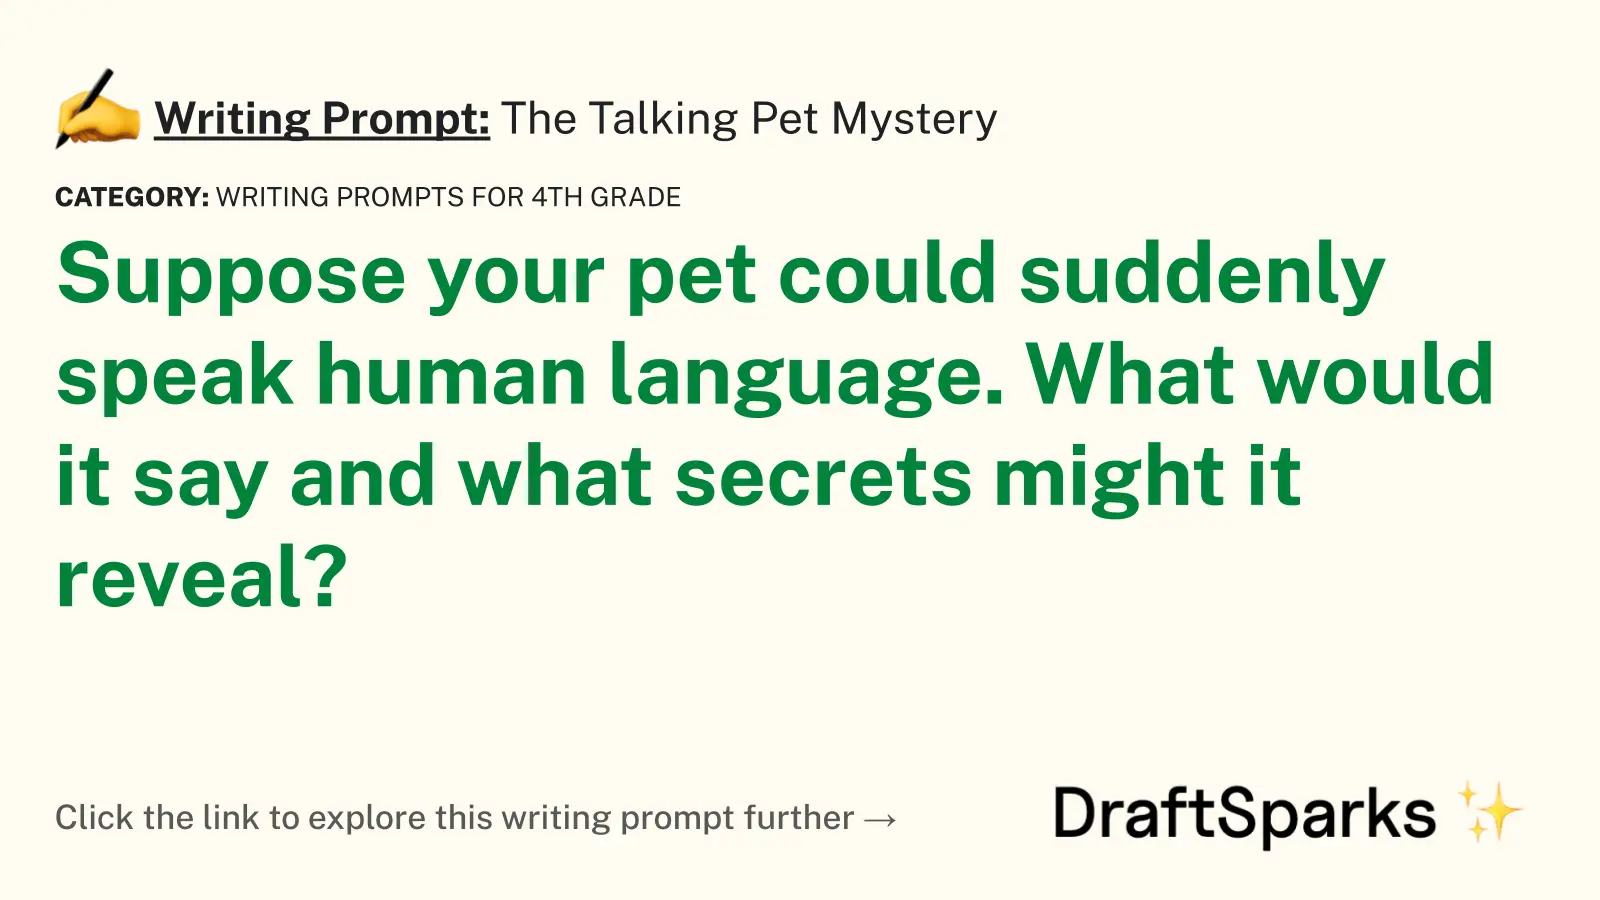 The Talking Pet Mystery